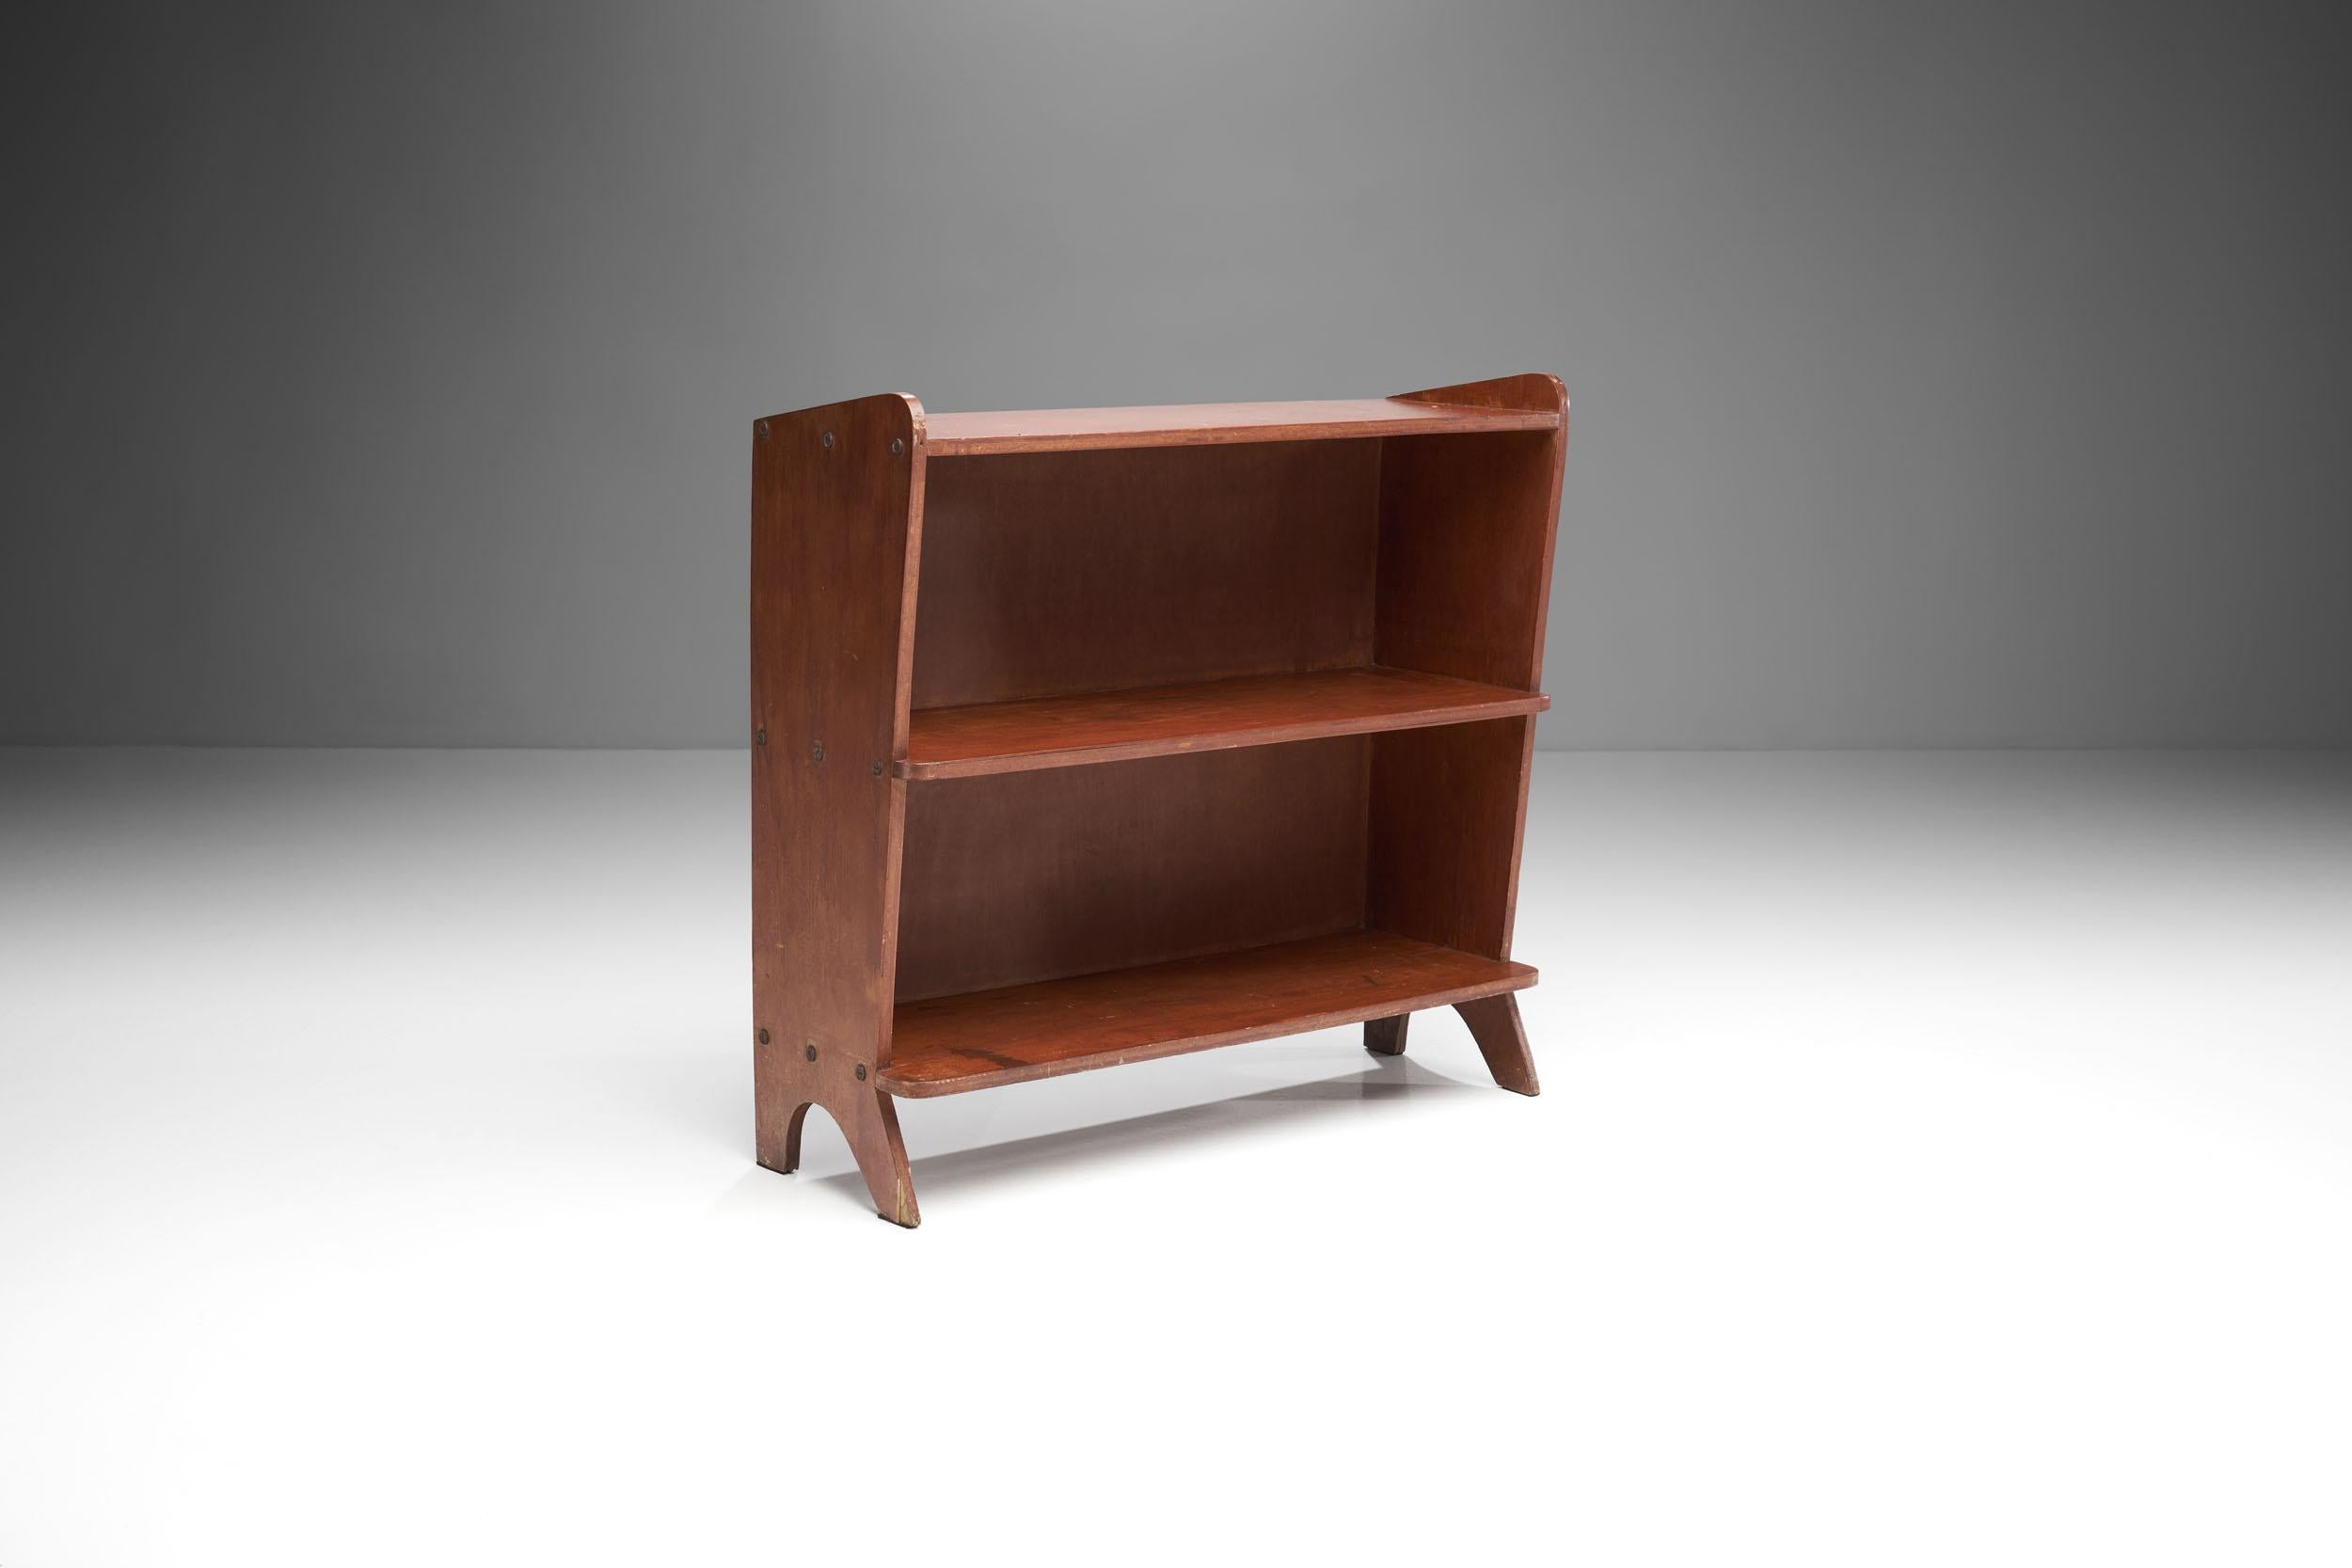 This bookcase is made out of thick plywood and features a sculptural and raw look that give it a lot of character. 

The sides have rounded out edges that are wider at the base and gradually become narrower towards the middle. The slightly raised